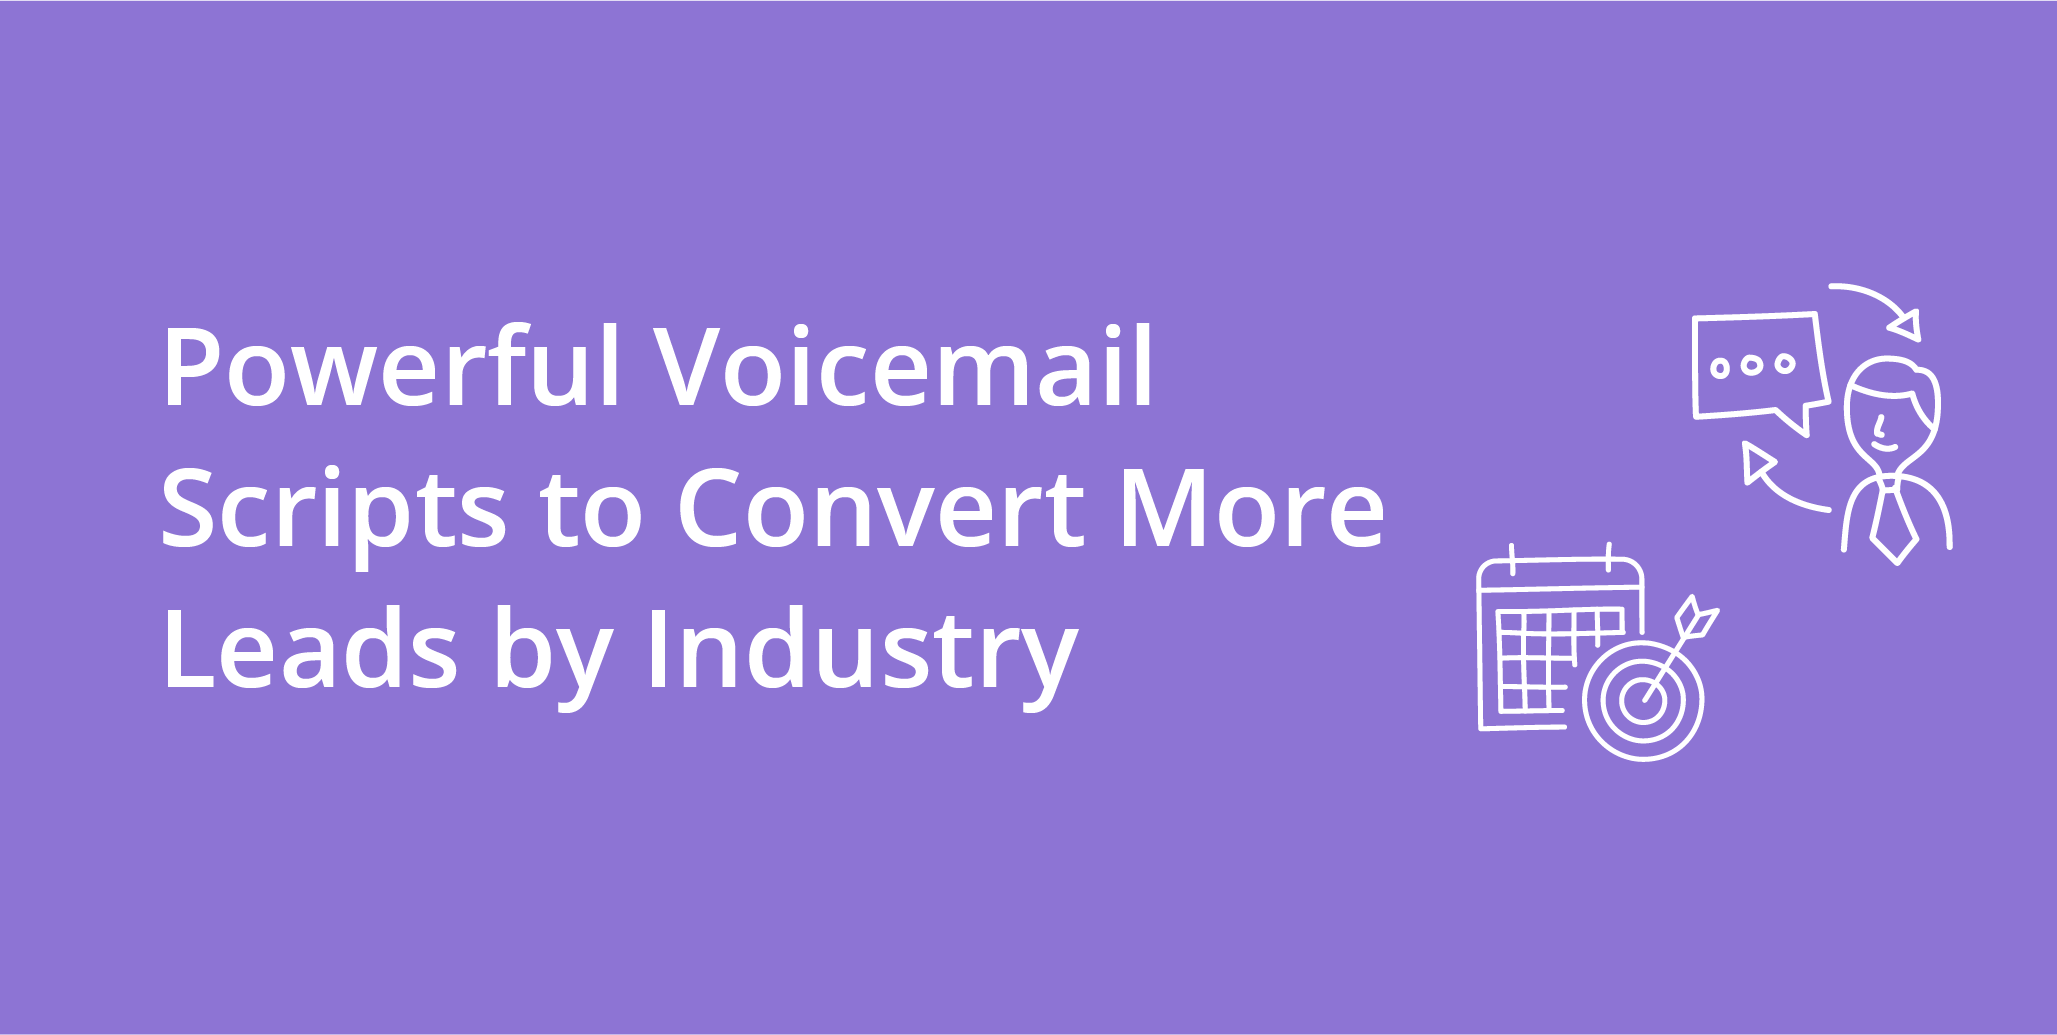 Powerful Voicemail Scripts to Convert More Leads by Industry | Telephones for business